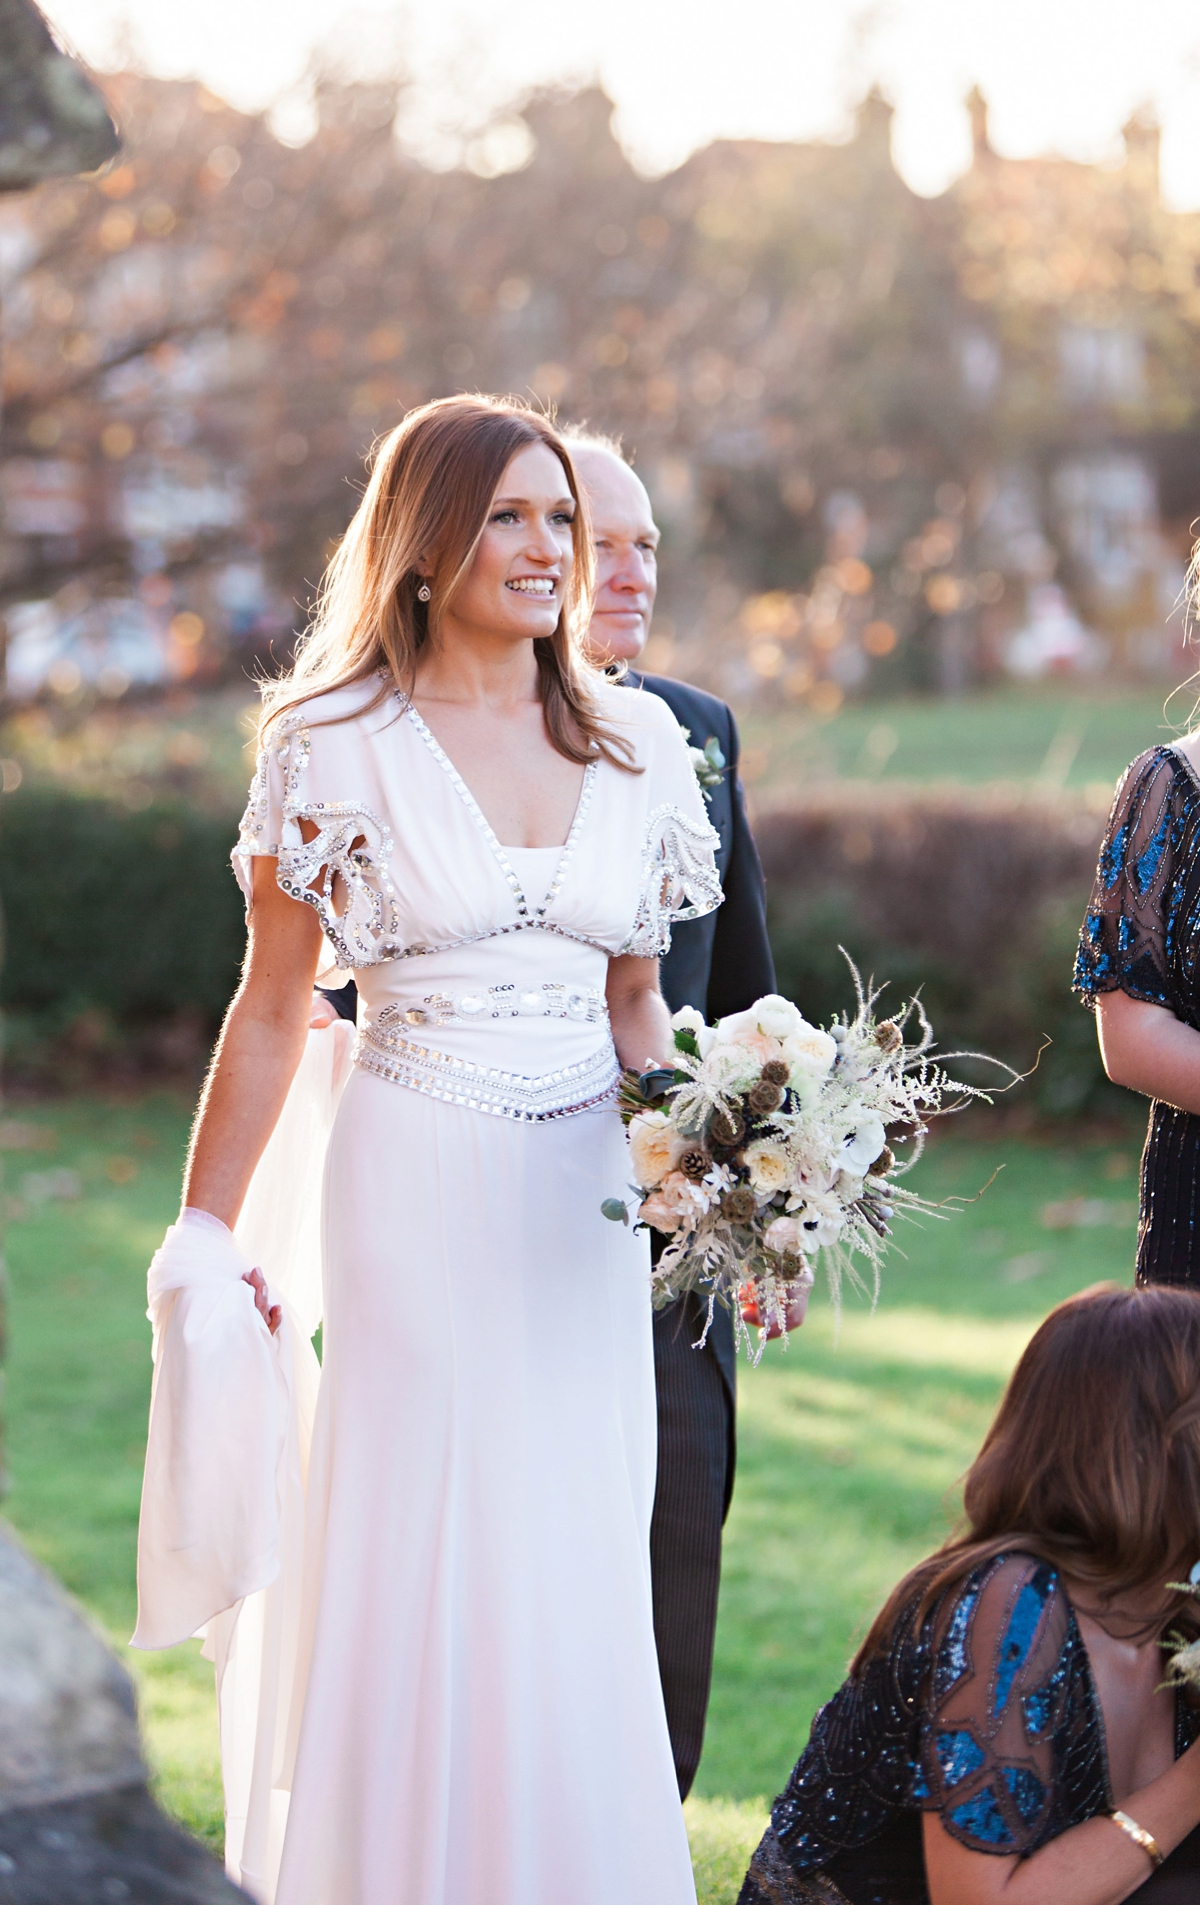 15 A bride in Temperley London for a sophisticated and elegant Winter wedding